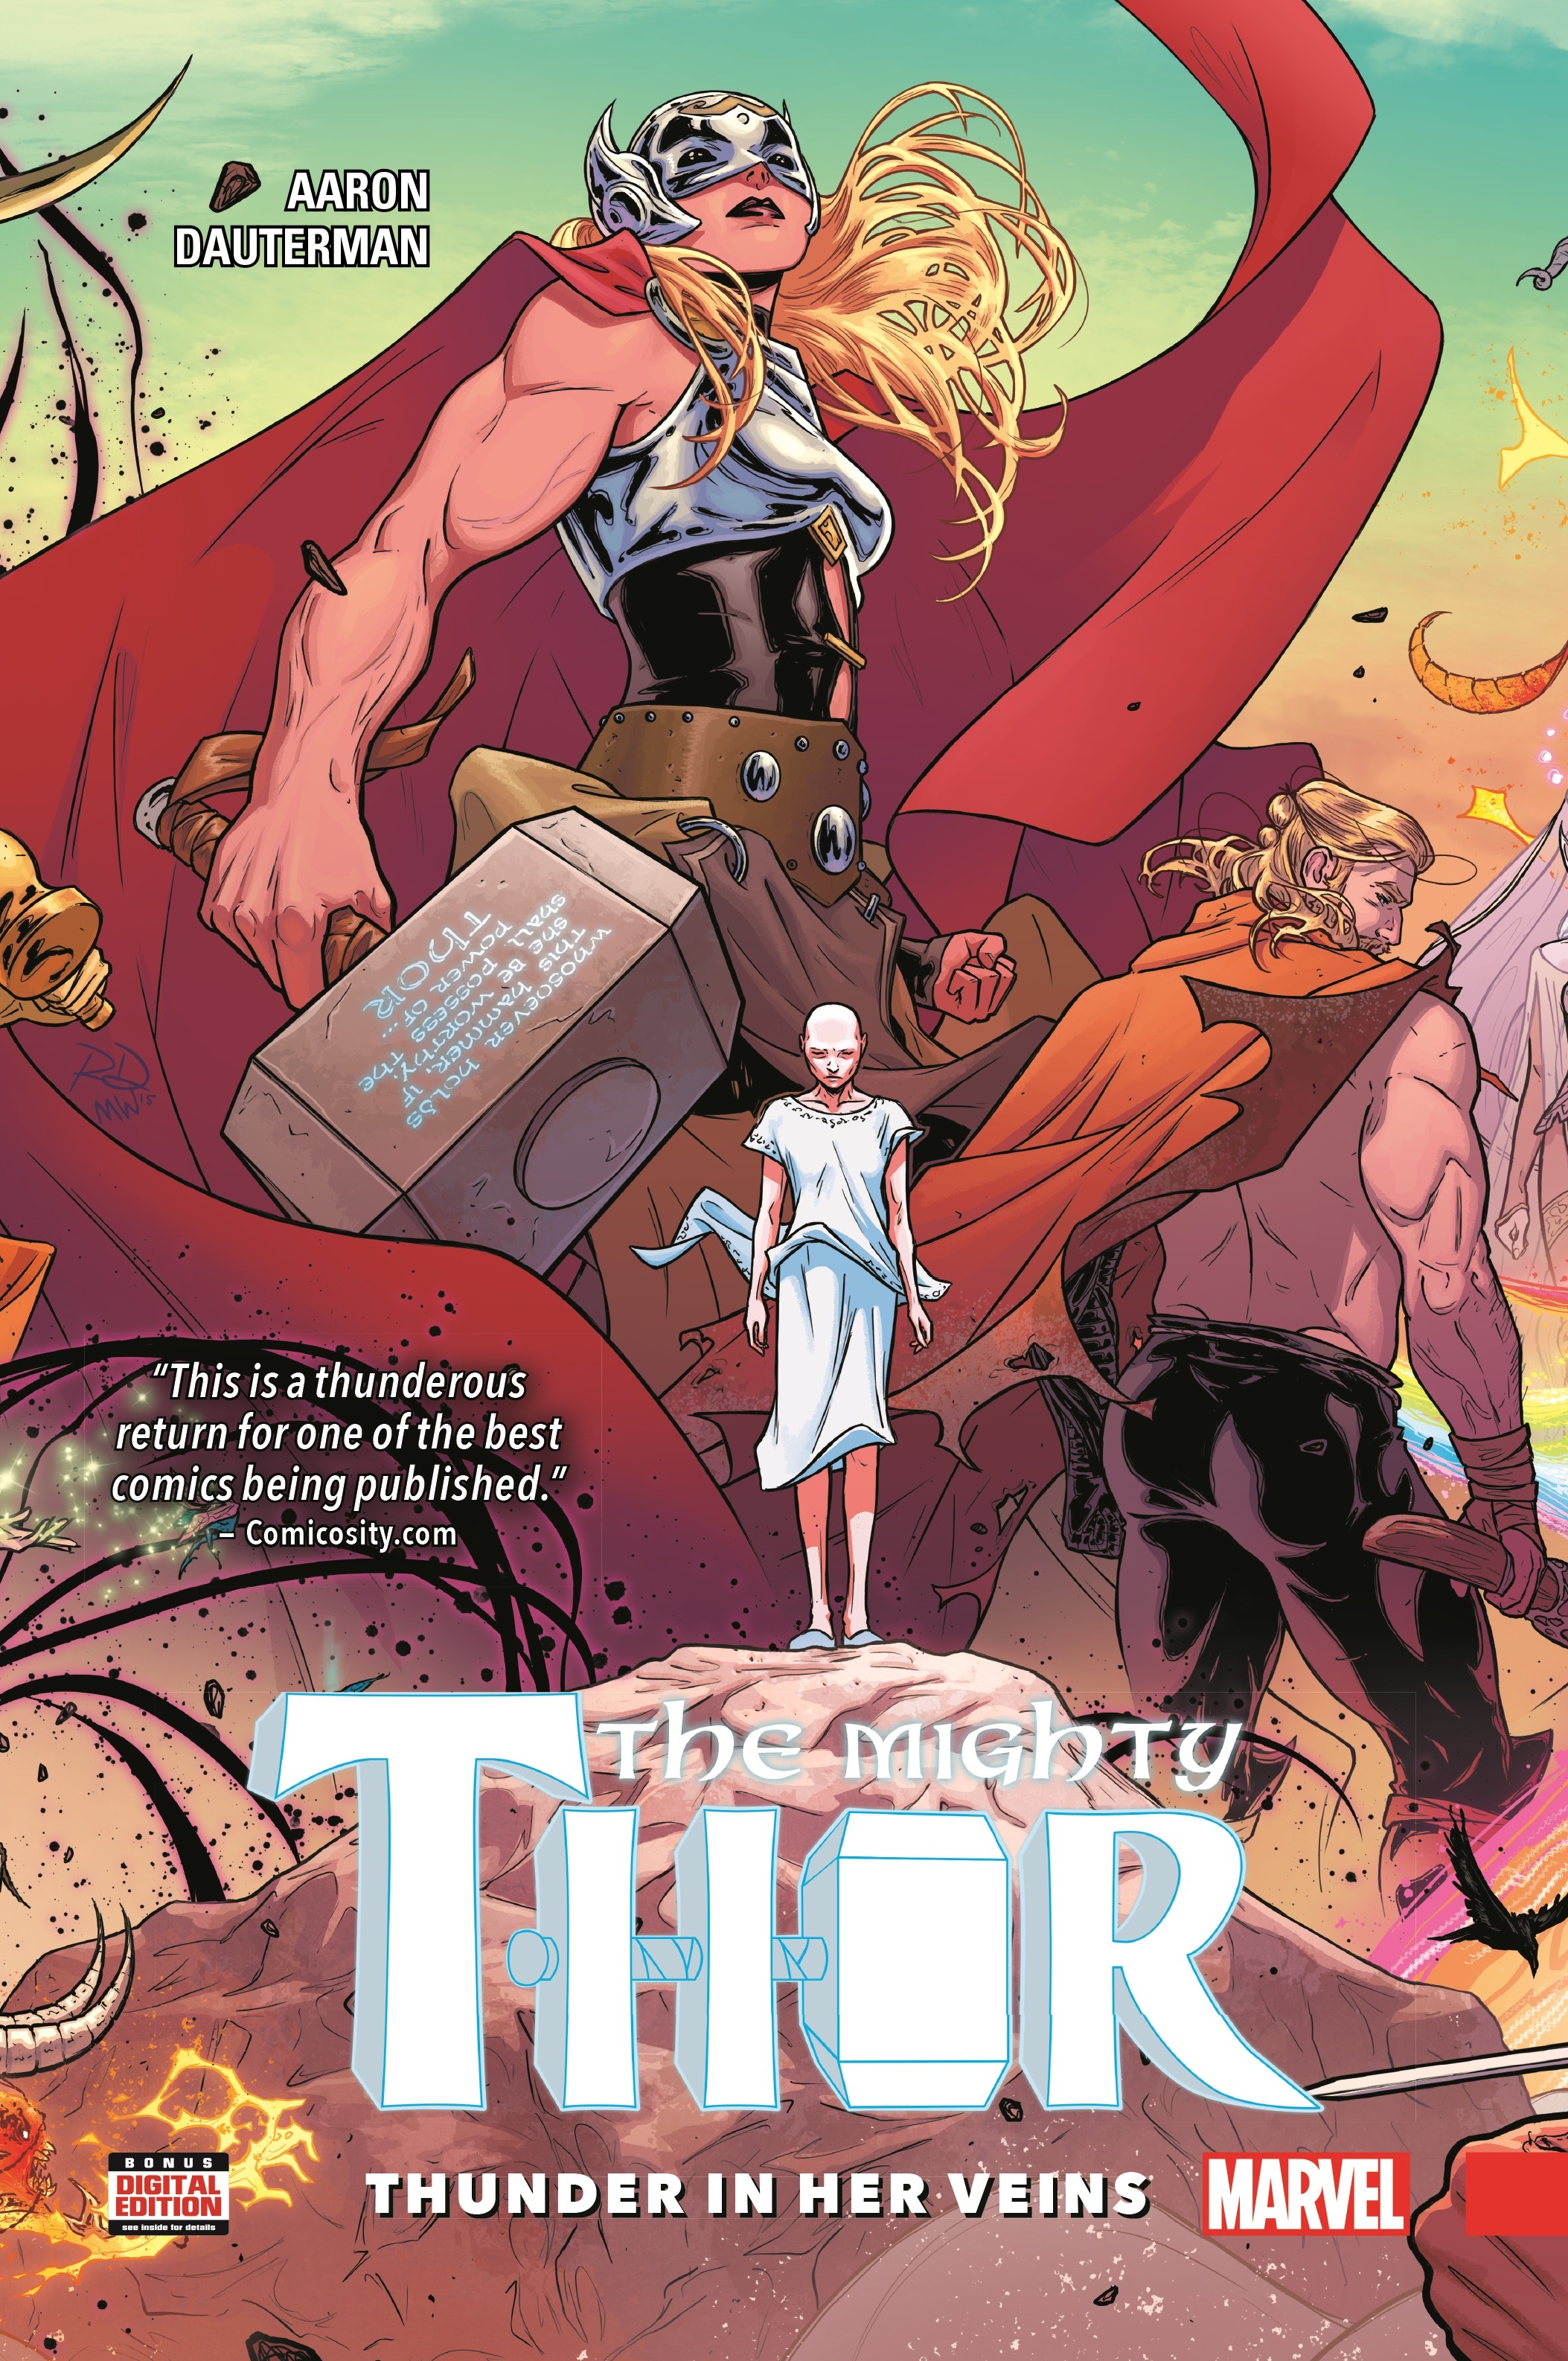 MIGHTY THOR VOL. 1: THUNDER IN HER VEINS (Trade Paperback)